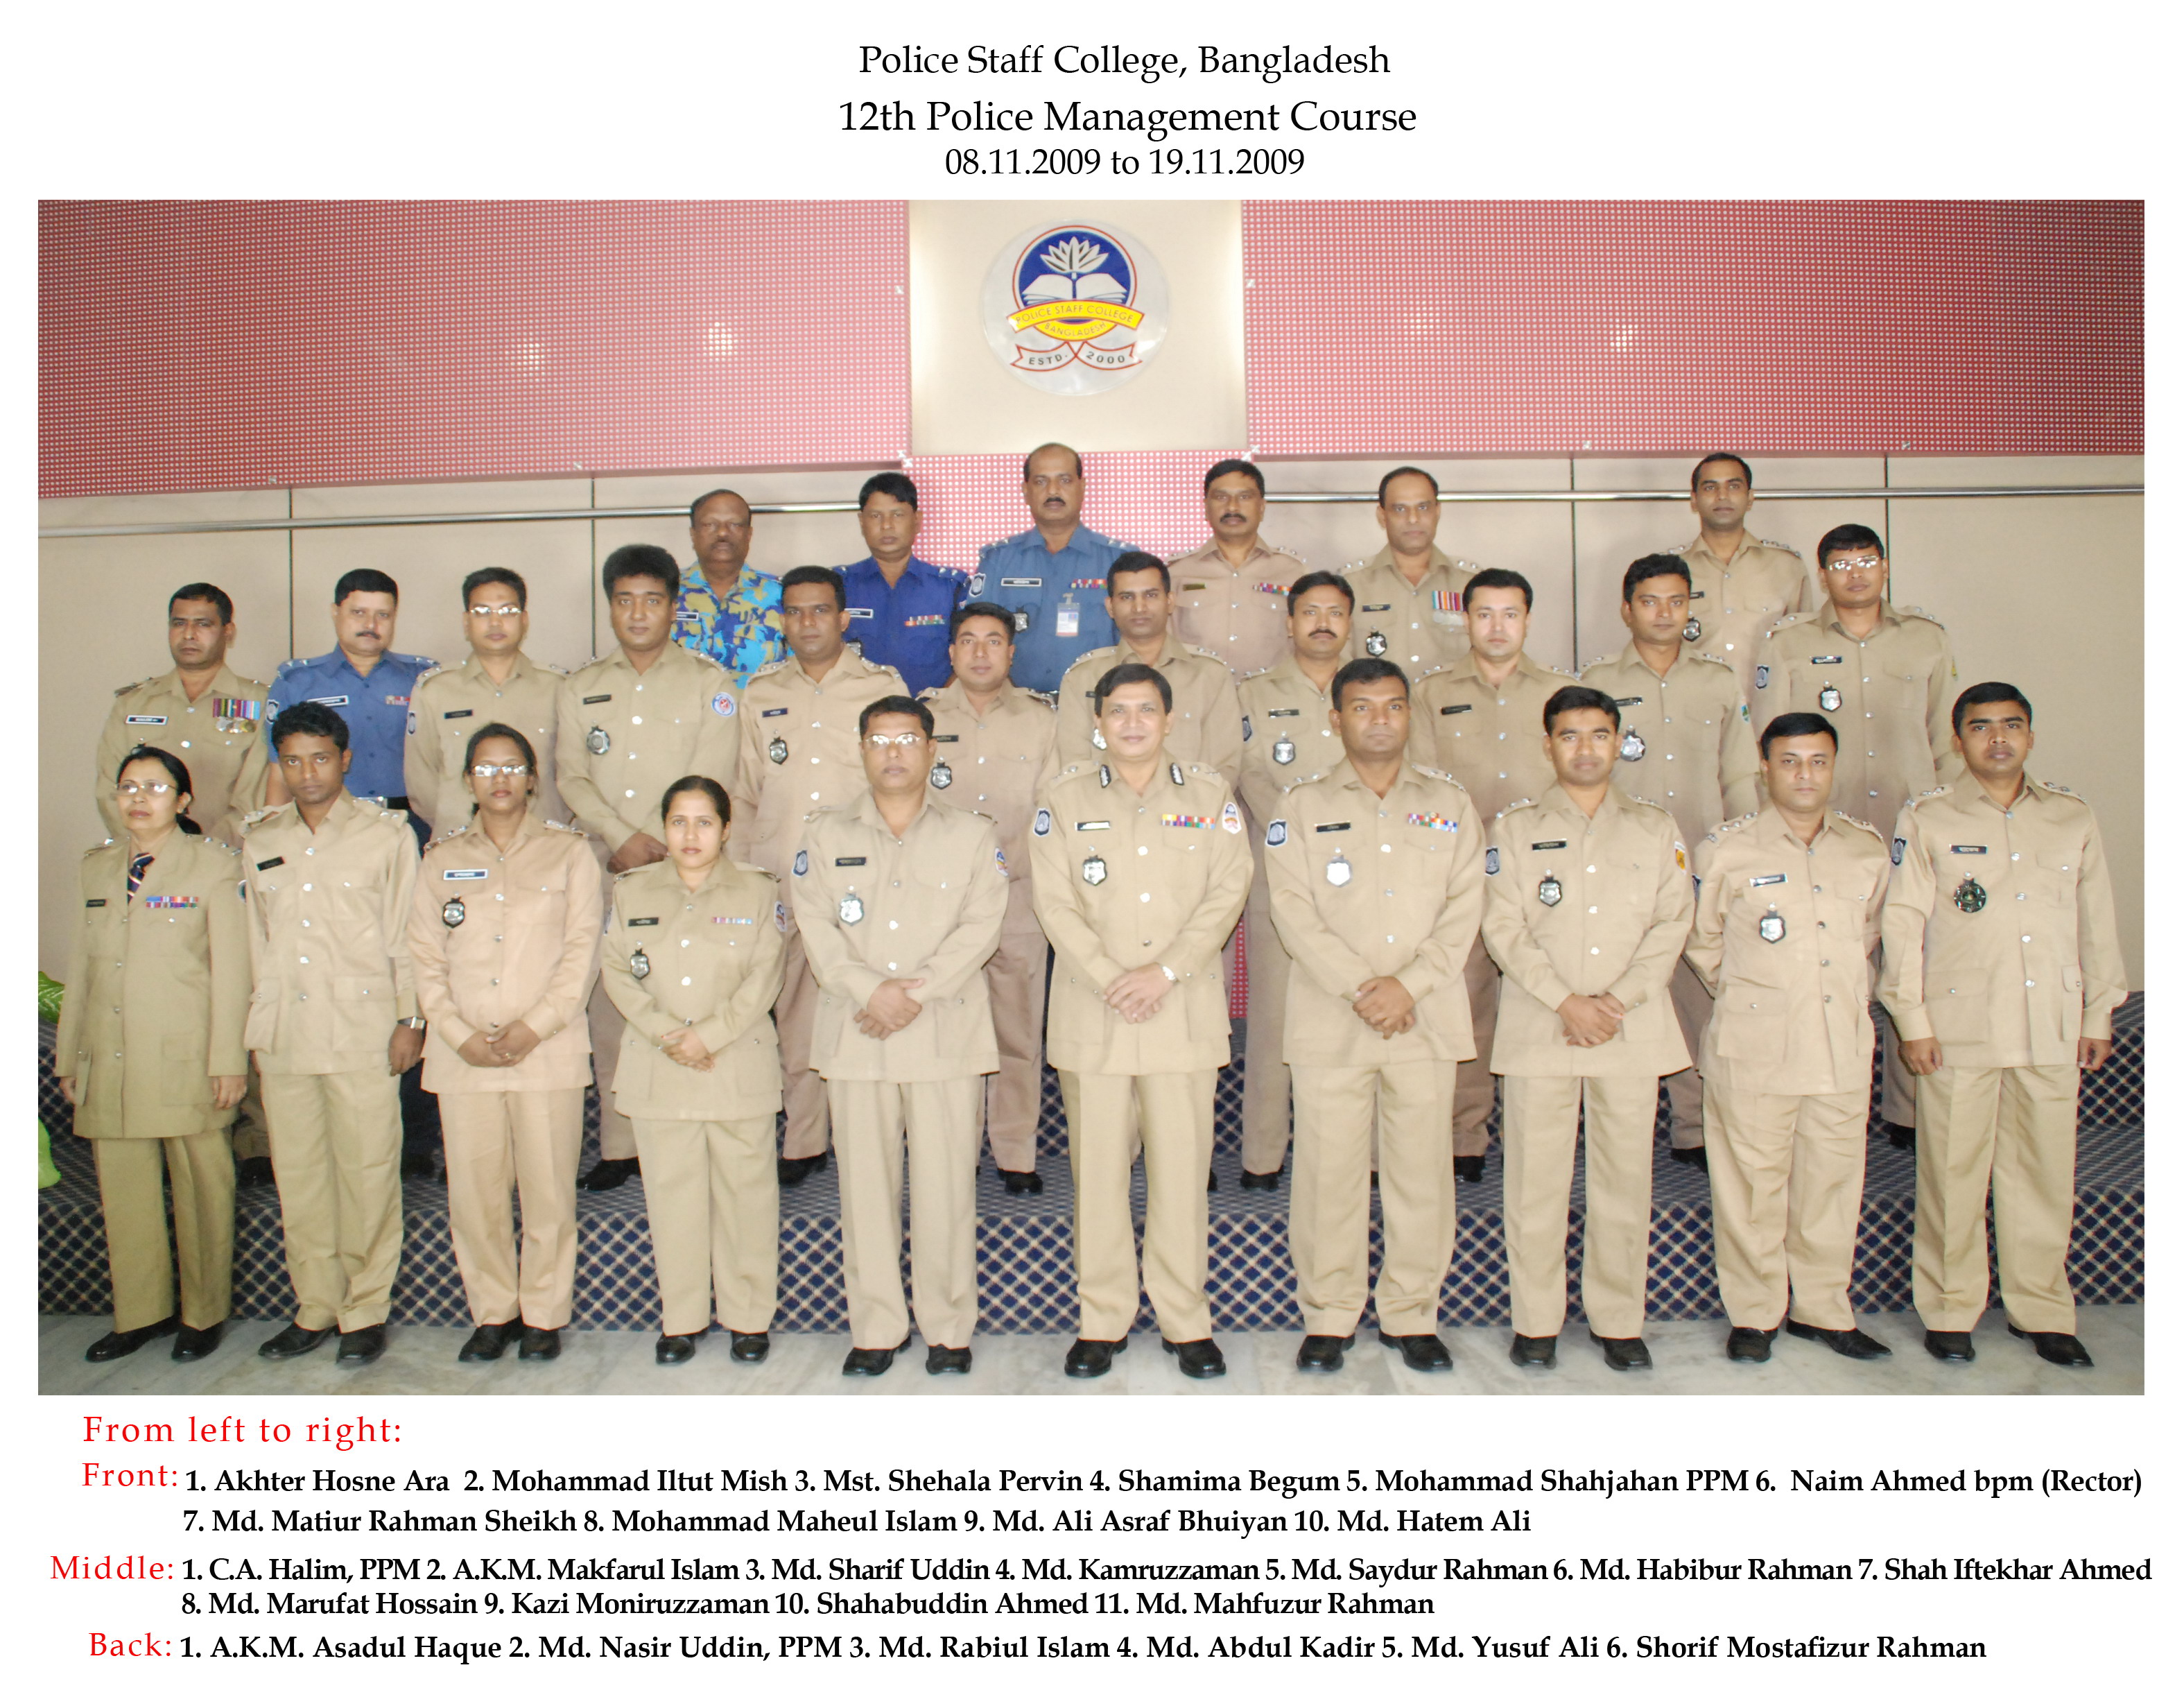 Participant of 12th Police Management Certificate Course. 